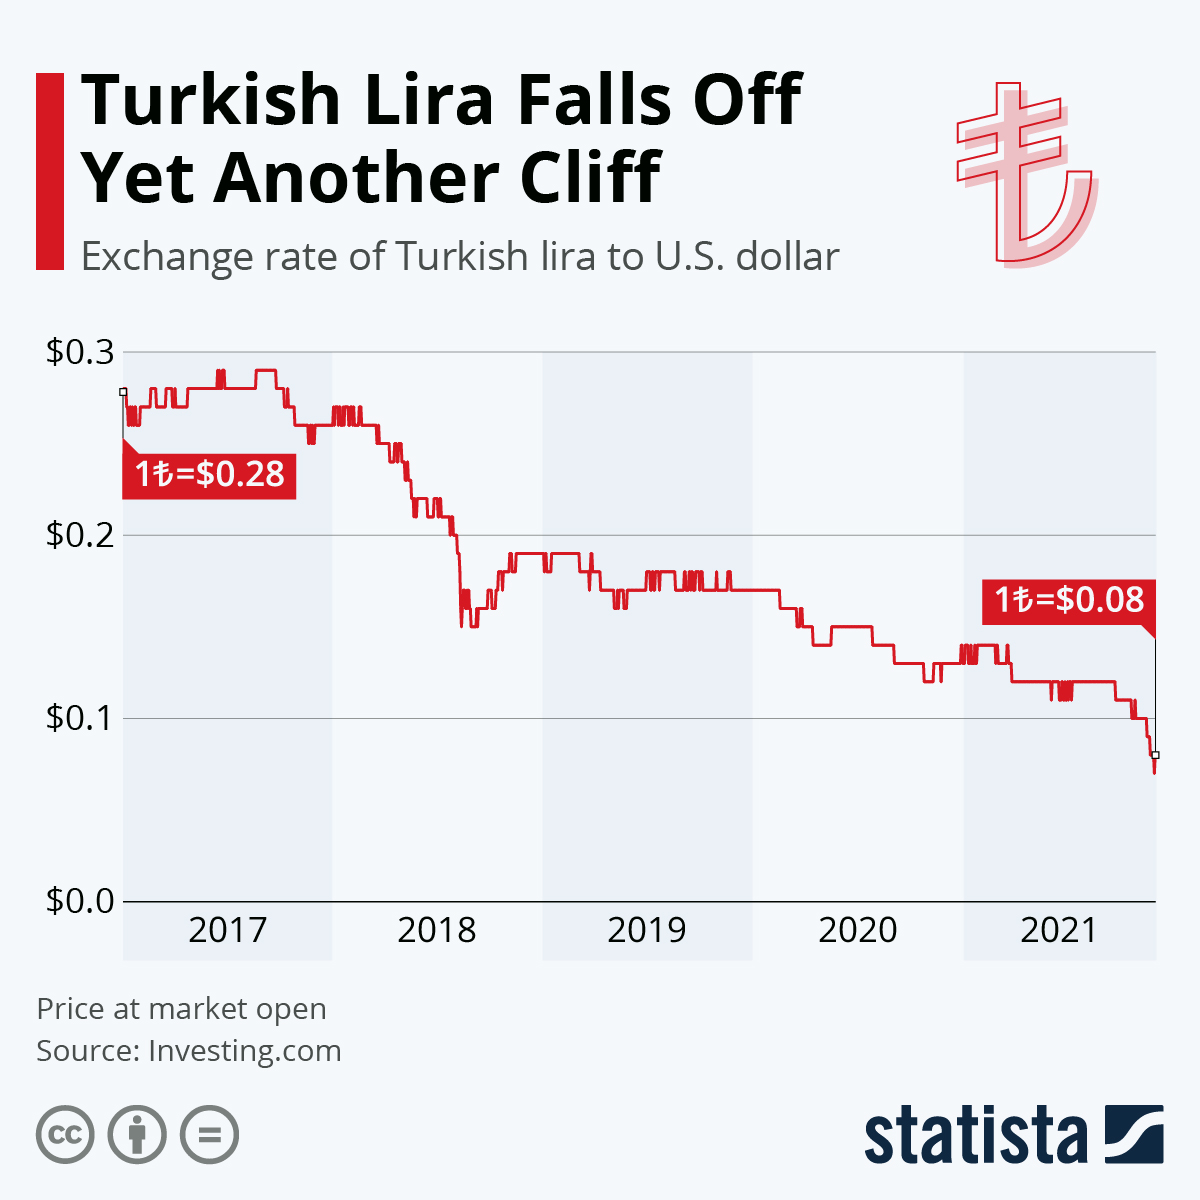 Turkish Lira Falls Off Yet Another Cliff